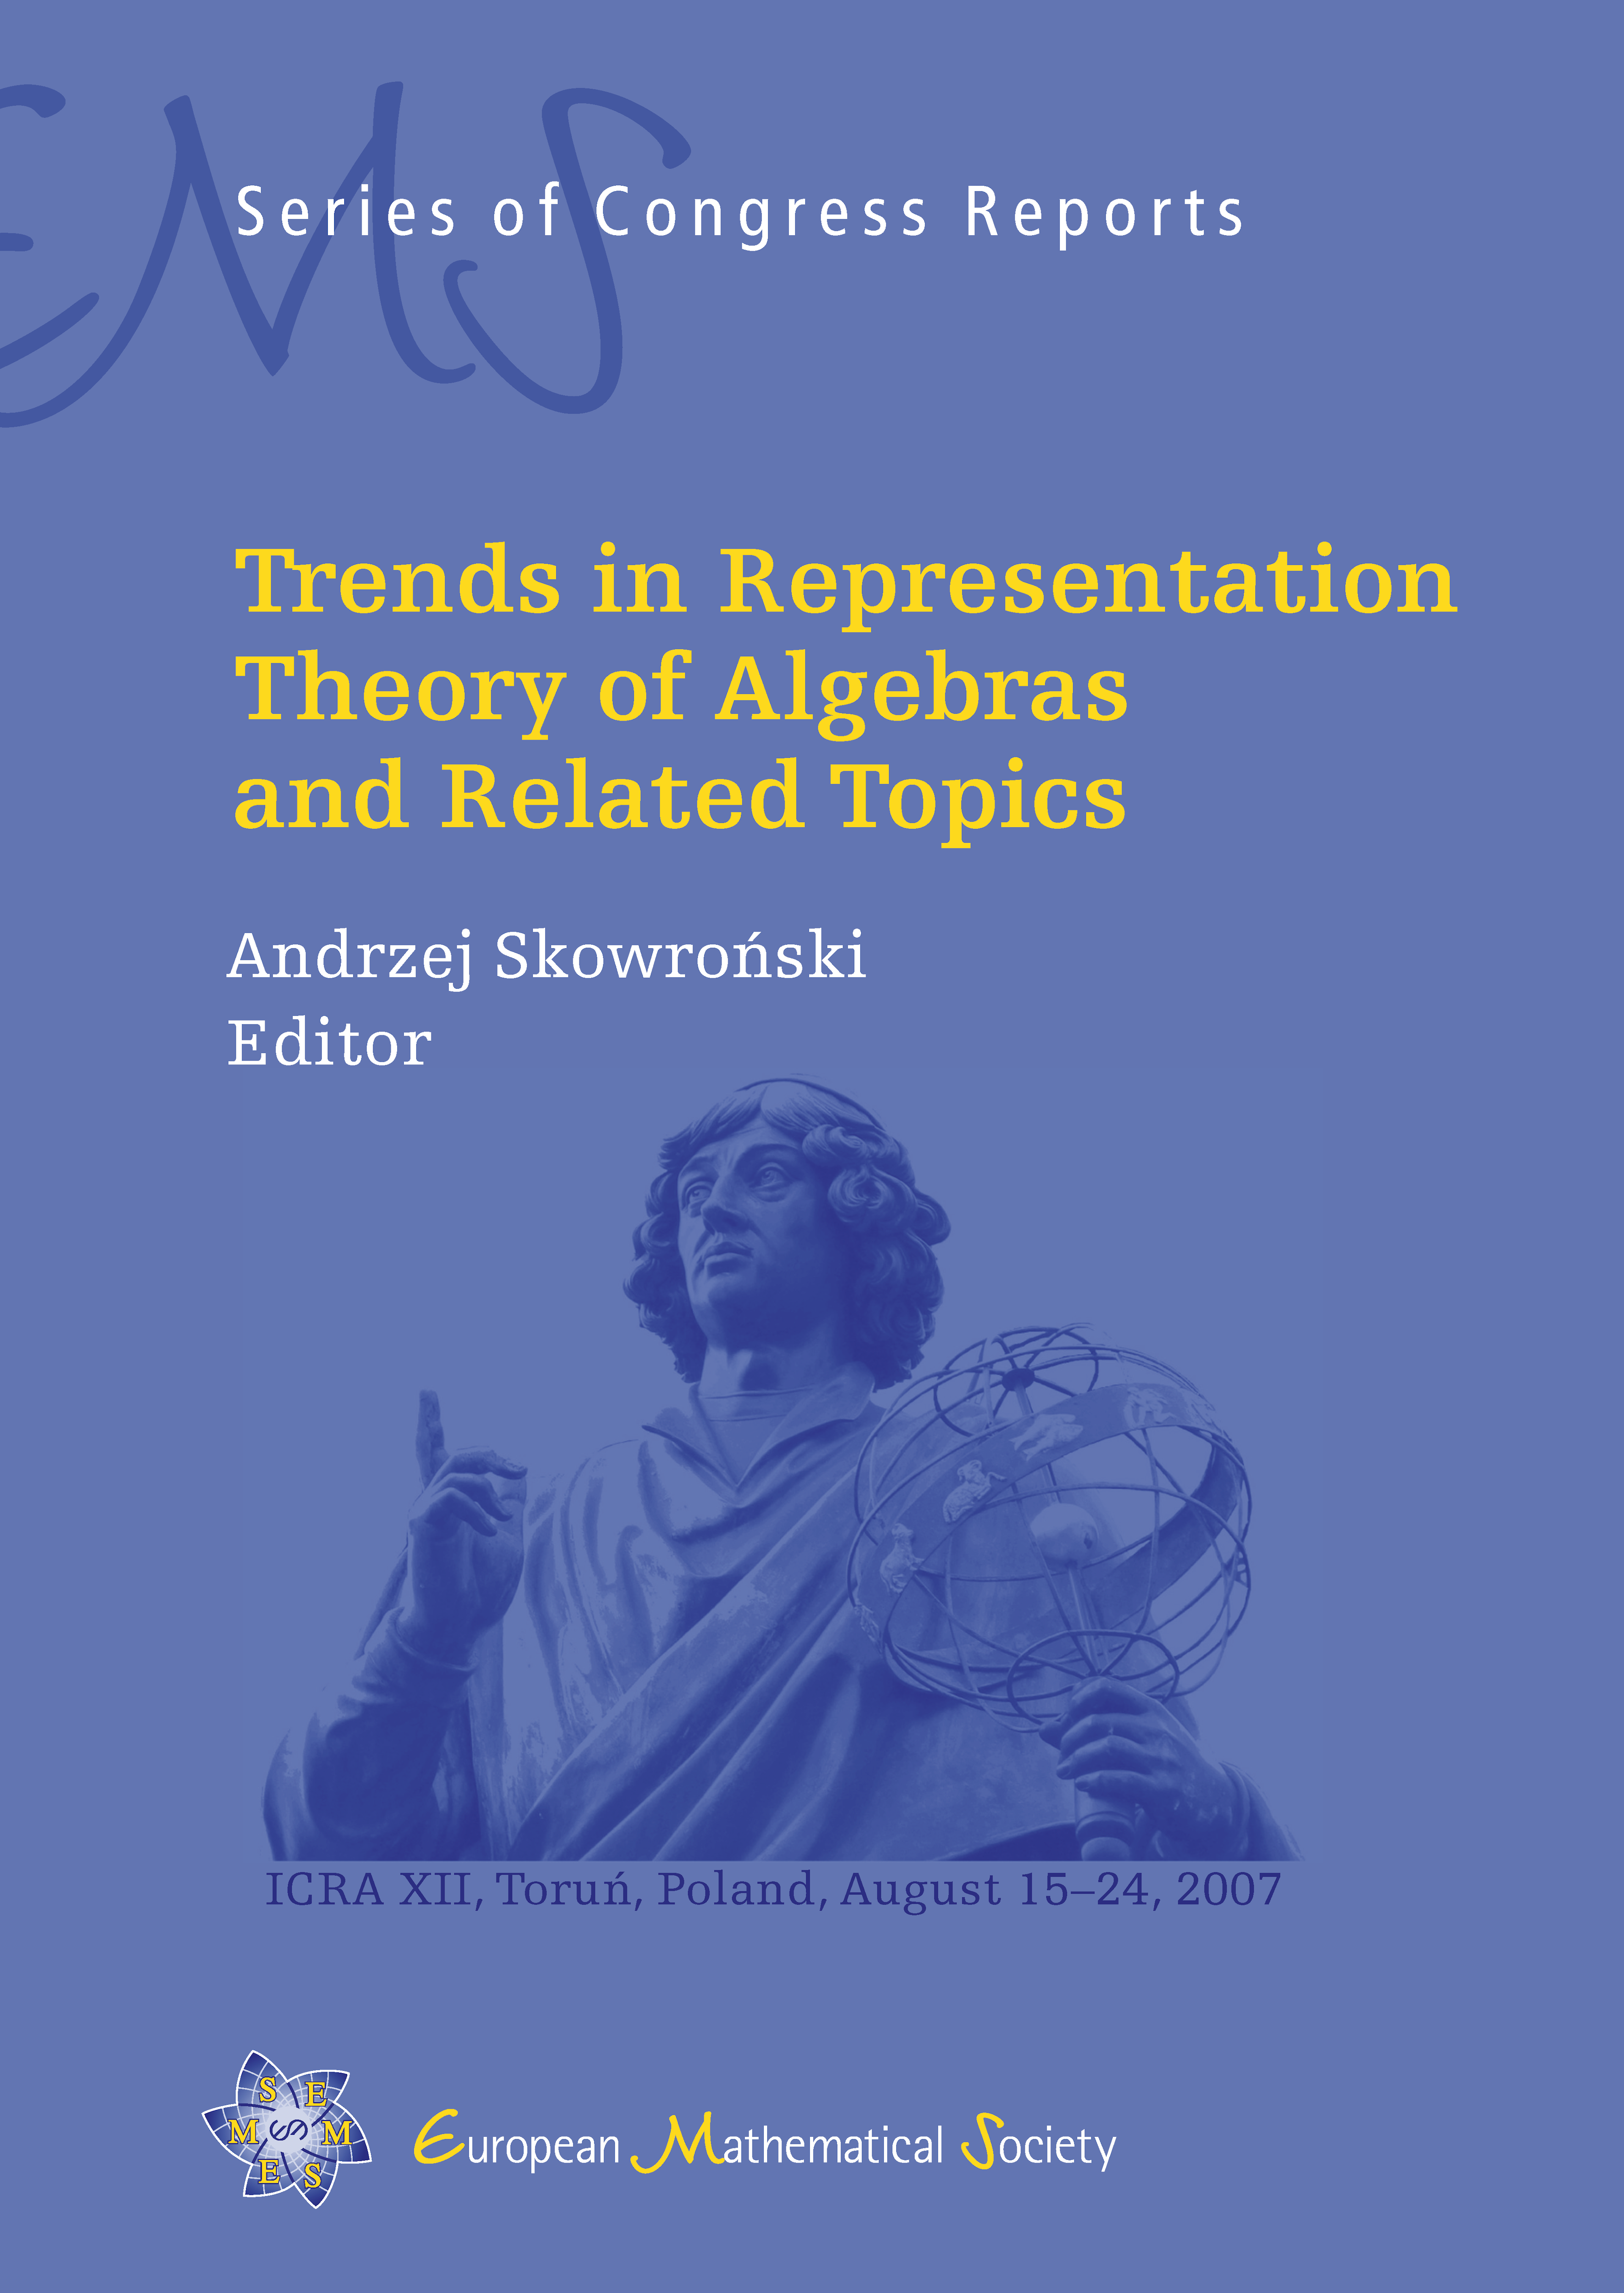 Representation types of algebras from the model theory point of view cover